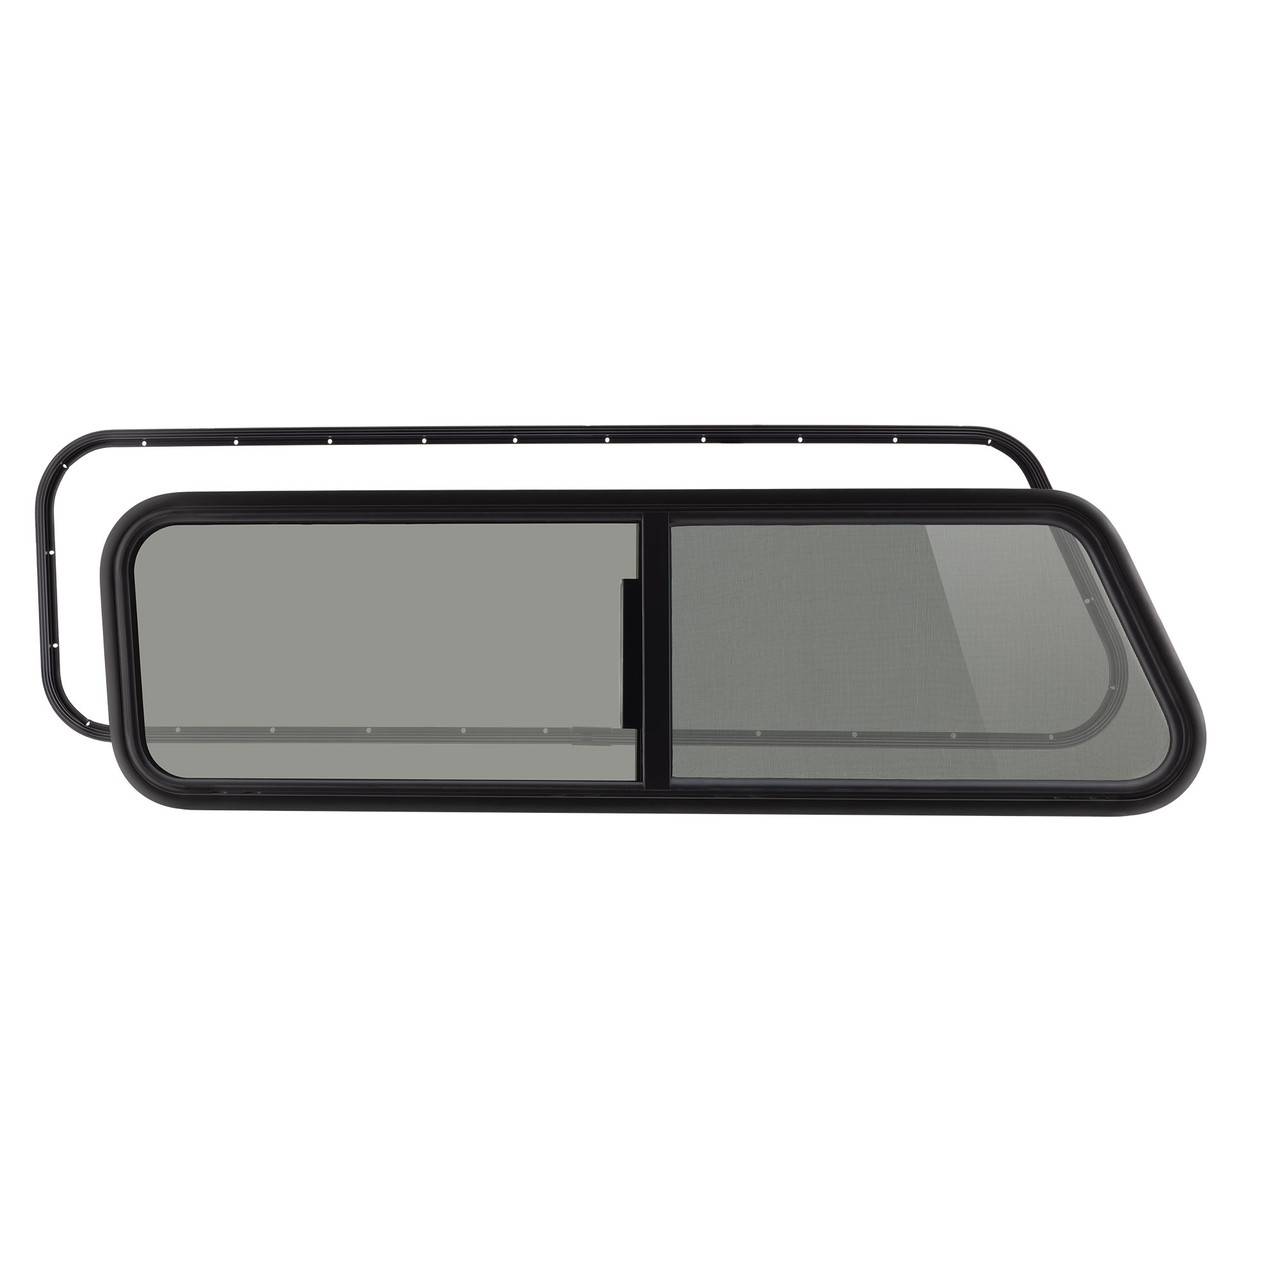 OEM Replacement Side Slider Window for Century Truck Caps 55x15